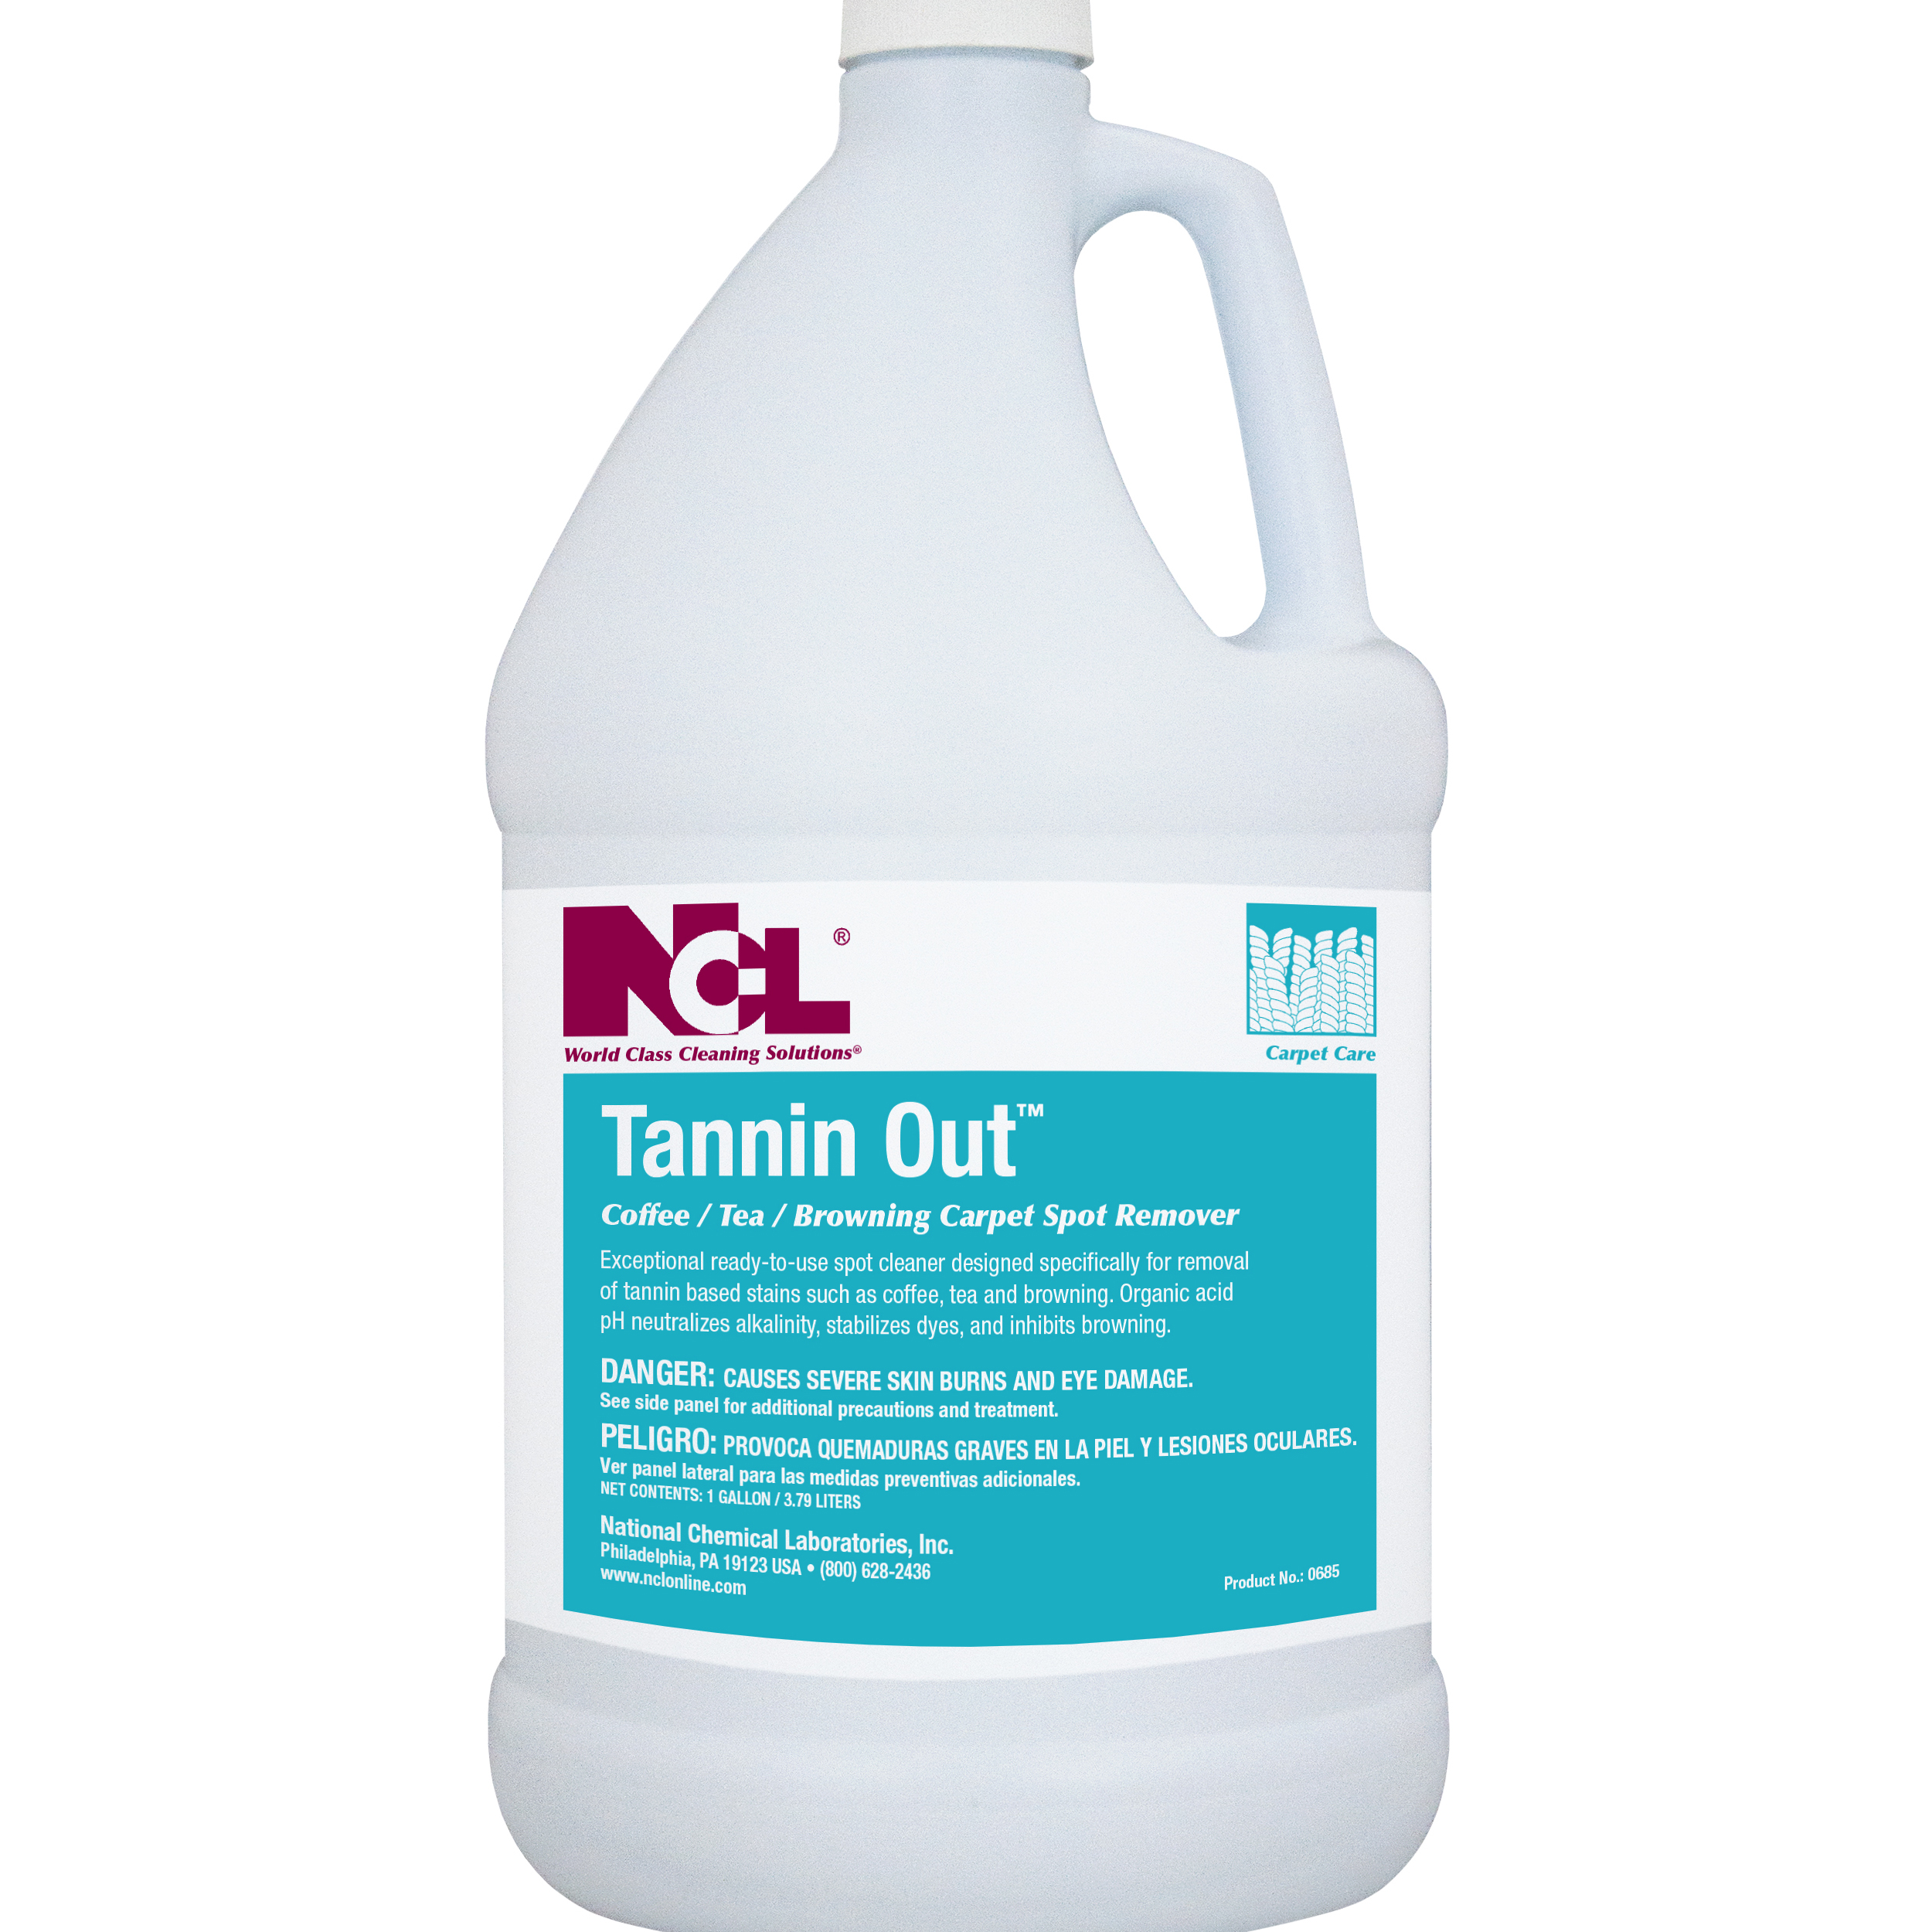  TANNIN OUT  Coffee / Tea / Browning Carpet Spot Remover 4/1 Gal. Case (NCL0685-29) 